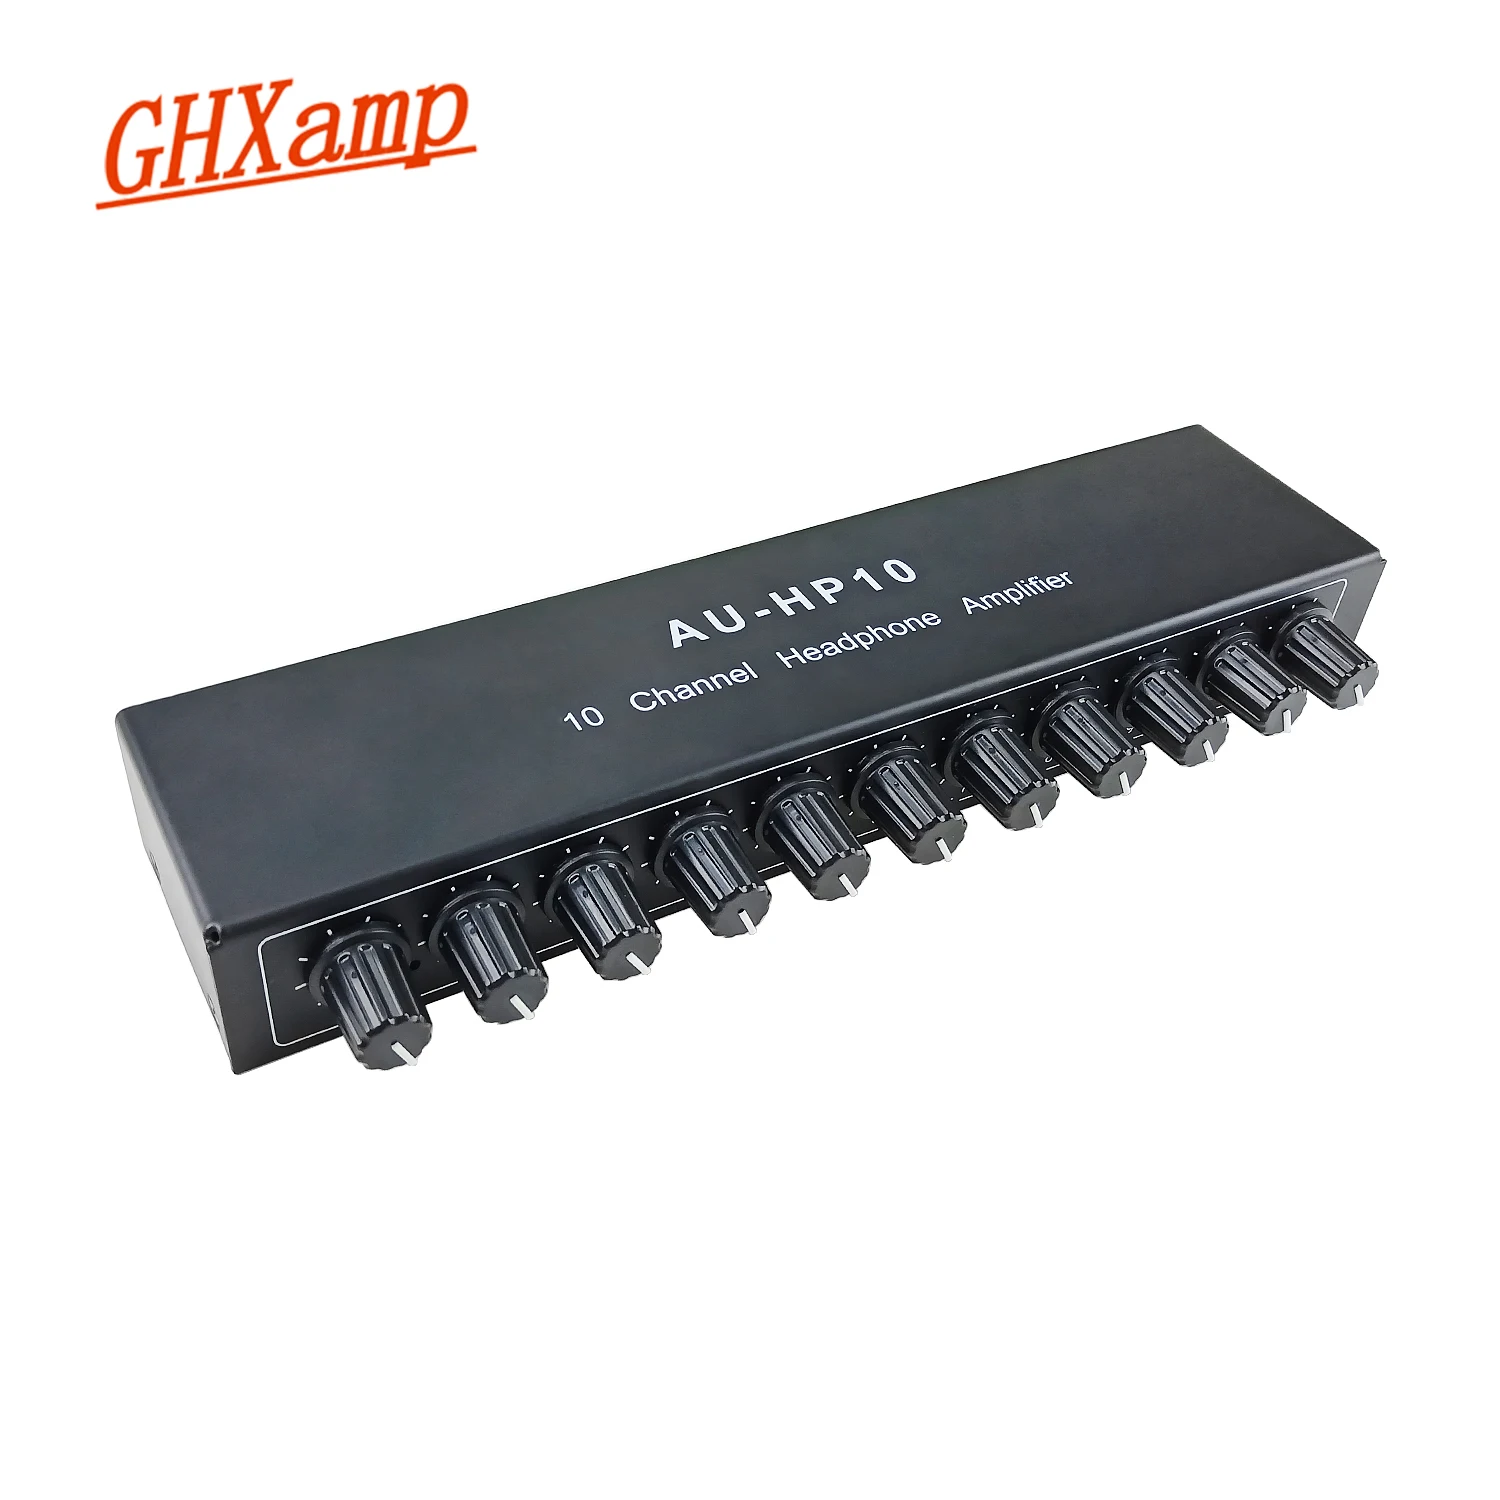 GHXAMP 10 Channel Stereo Headphone Amplifier Audio (1input 10 output ) Preamplifier Independent Vol Adjust NJM4556A DC12-24V 1PC